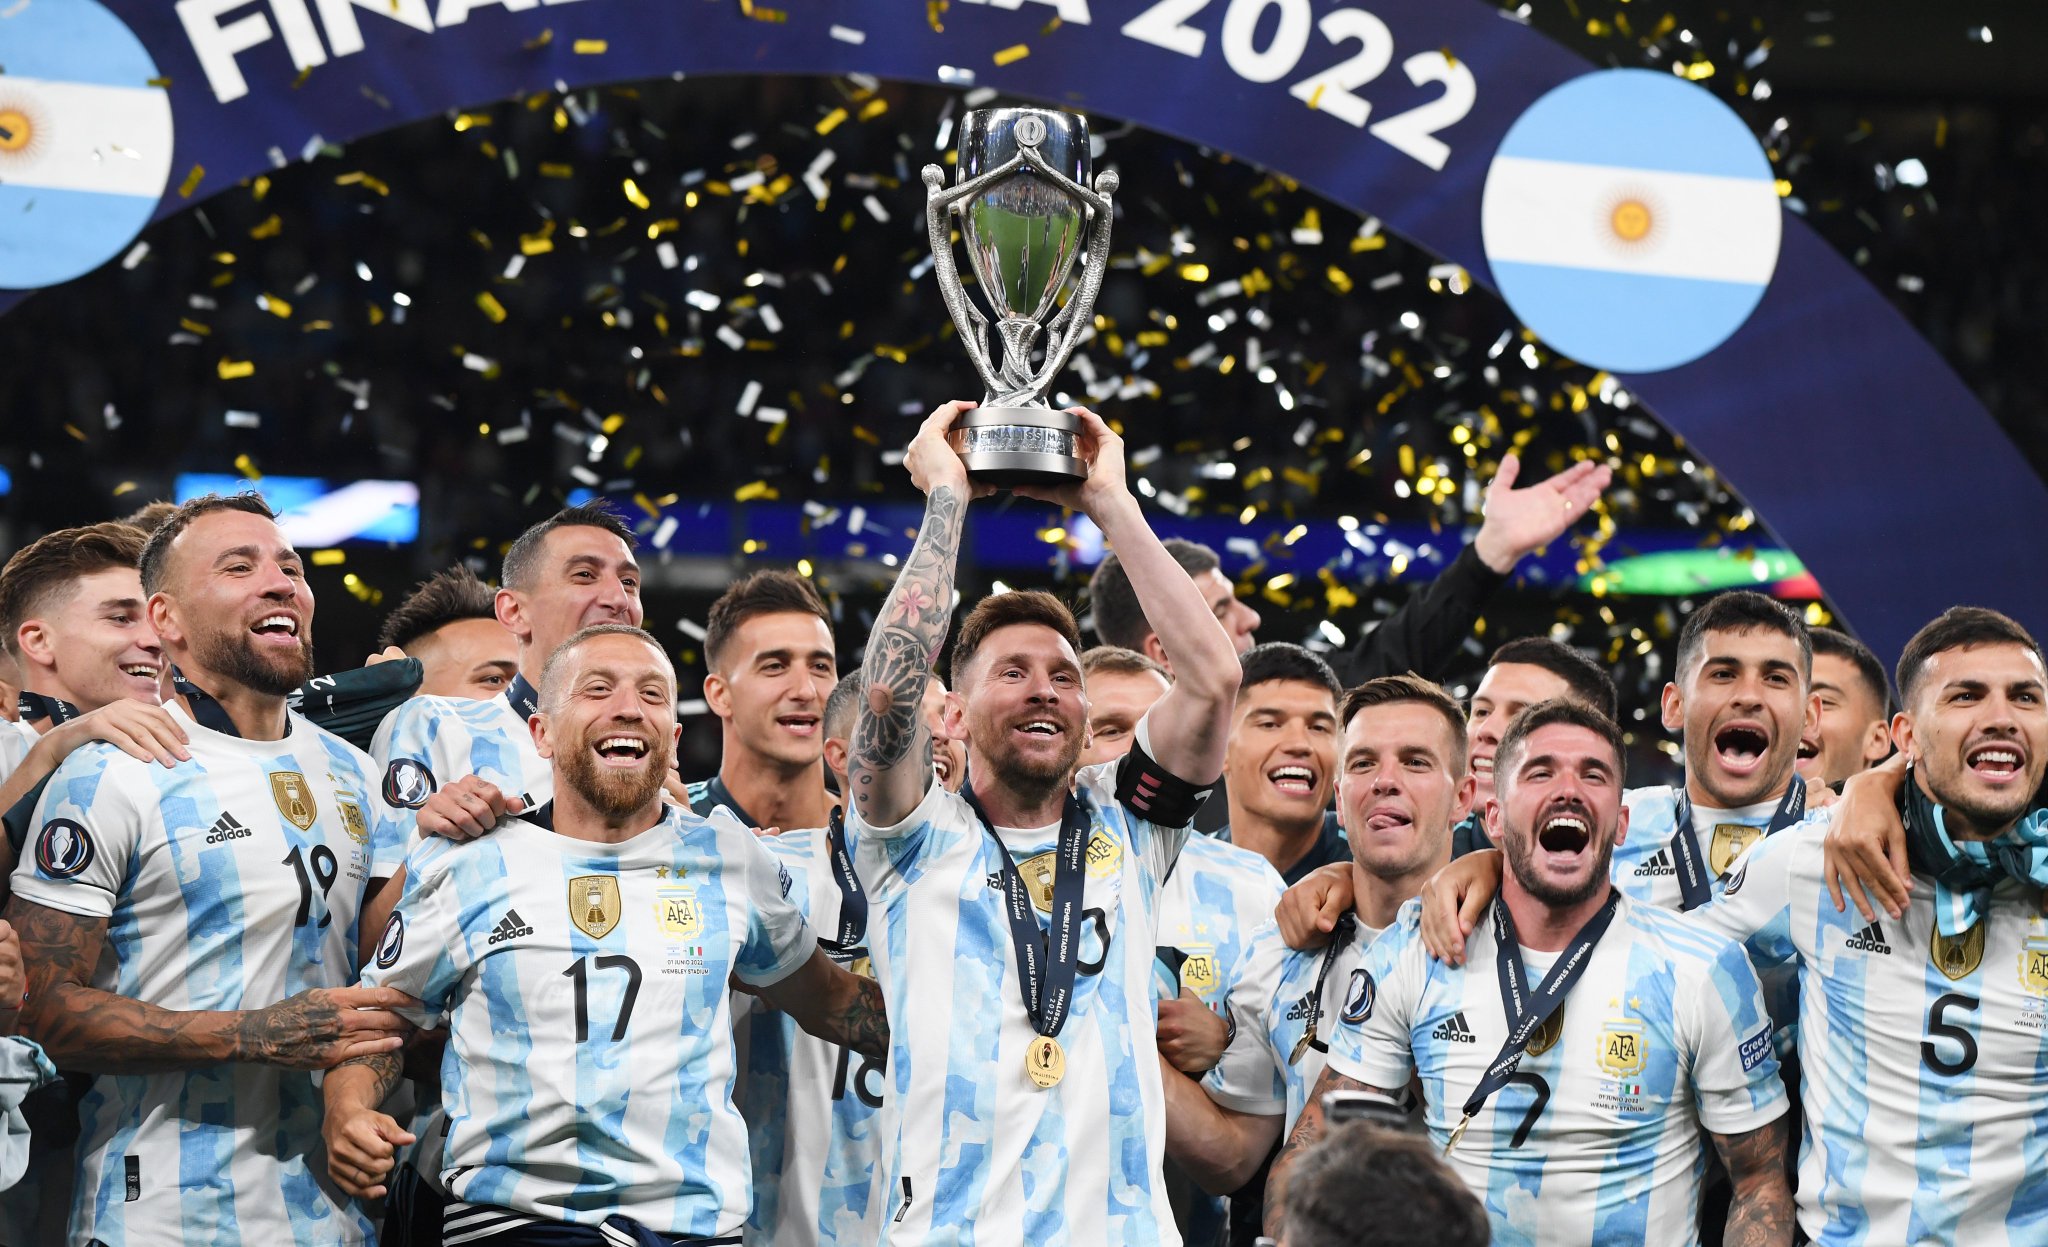 La Finalissima: Messi Lands Another Trophy With Argentina After 3-0 Win Vs Italy